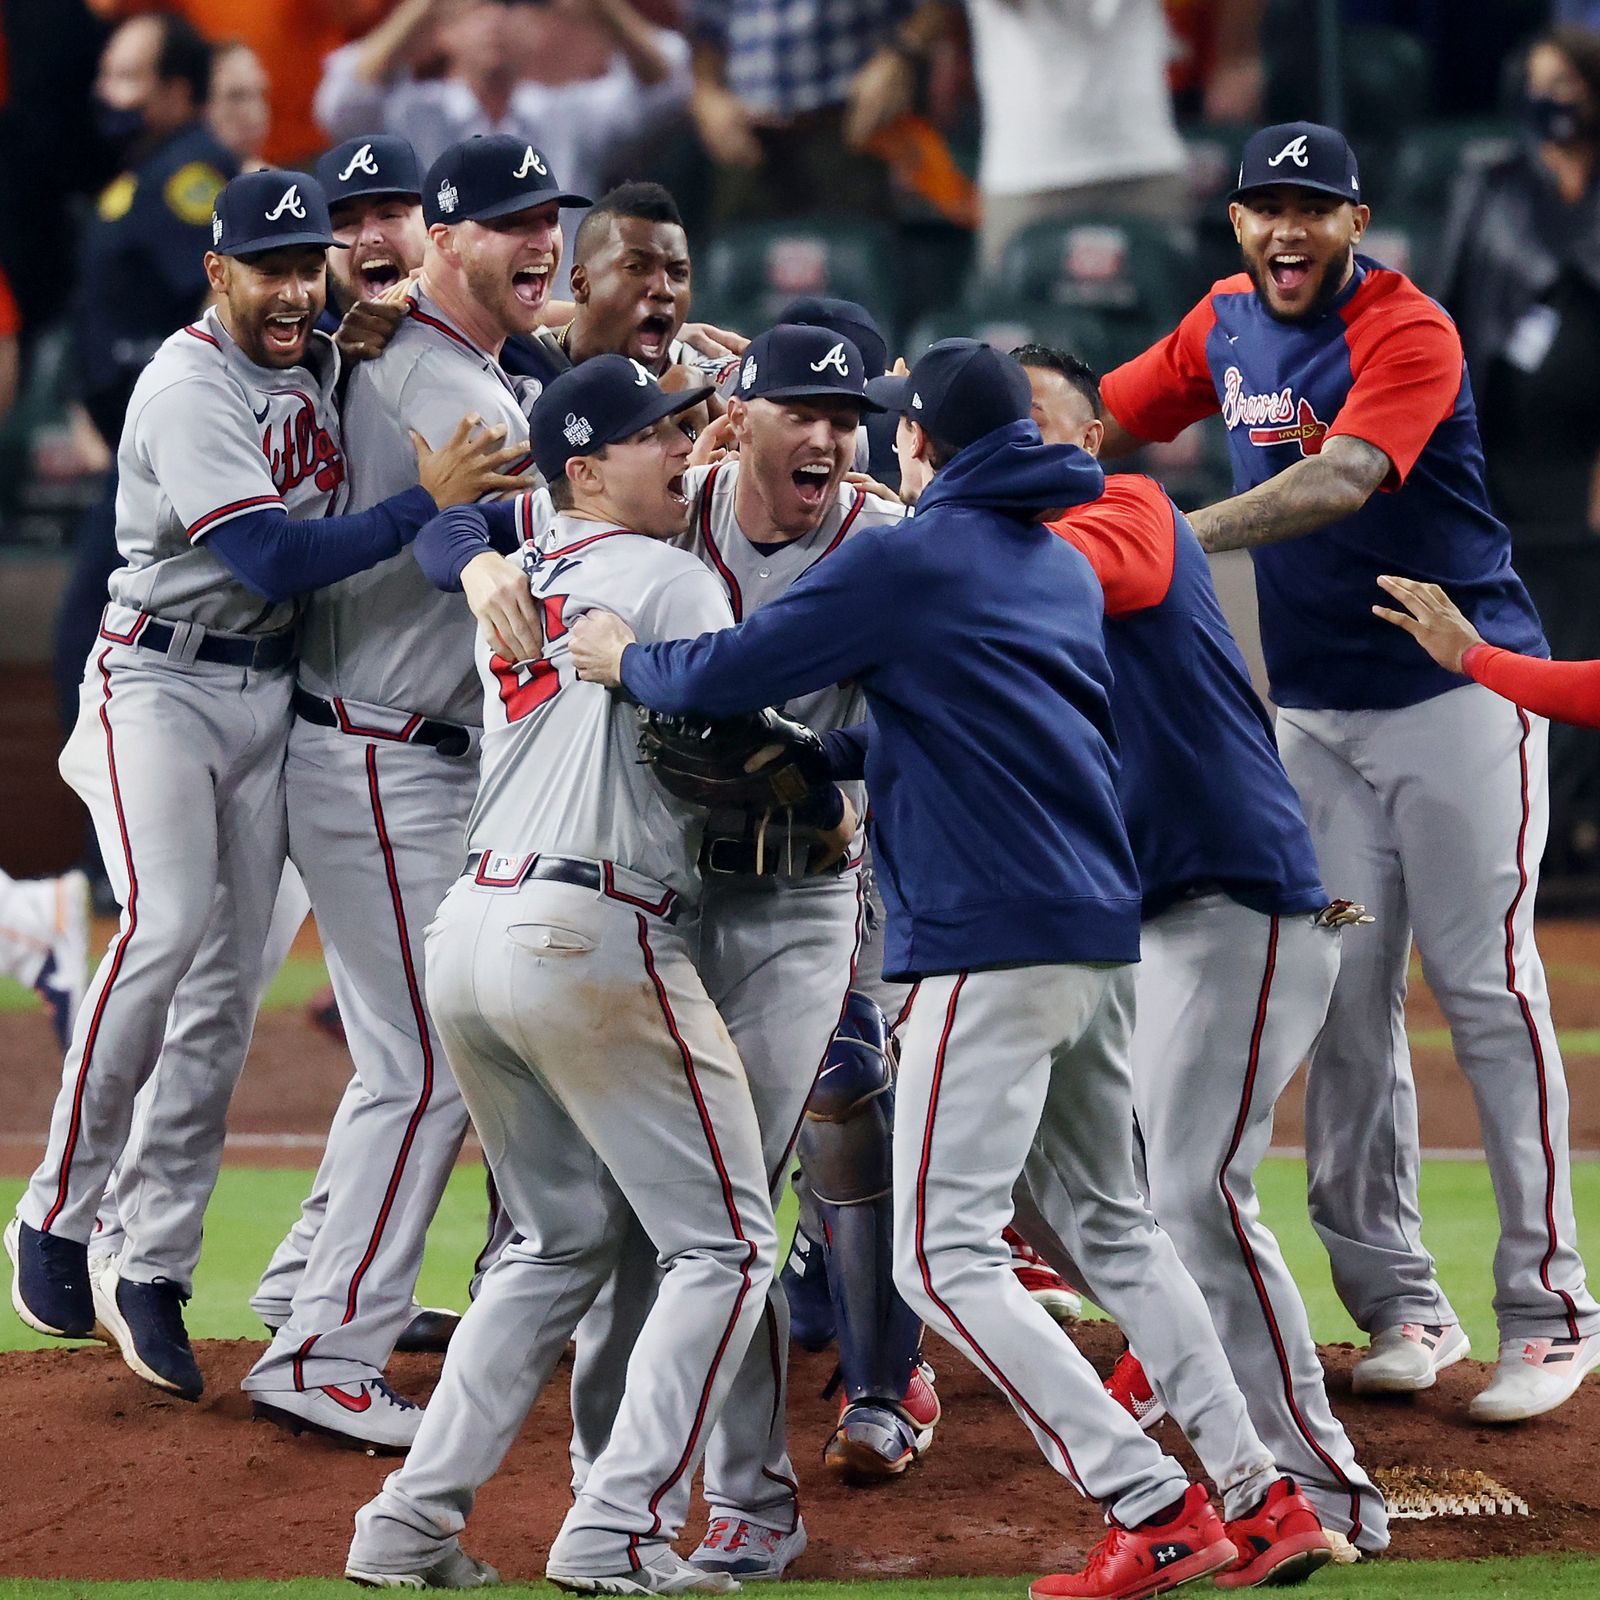 The wait is over: Atlanta Braves win their first World Series 